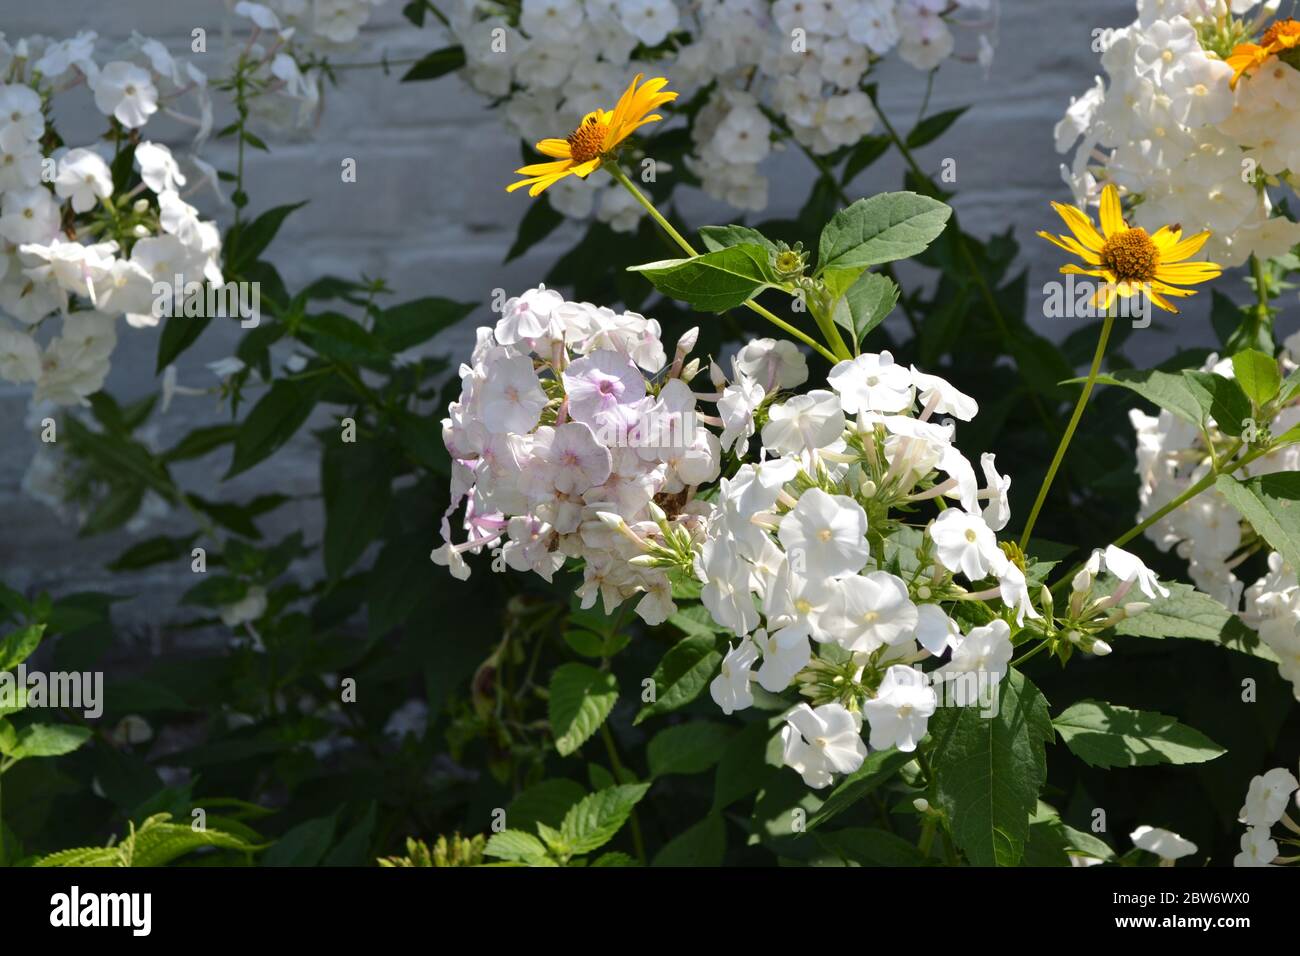 Gardening. Beautiful inflorescences. Phlox flower. Perennial herbaceous plant. High branches. White flowers Stock Photo